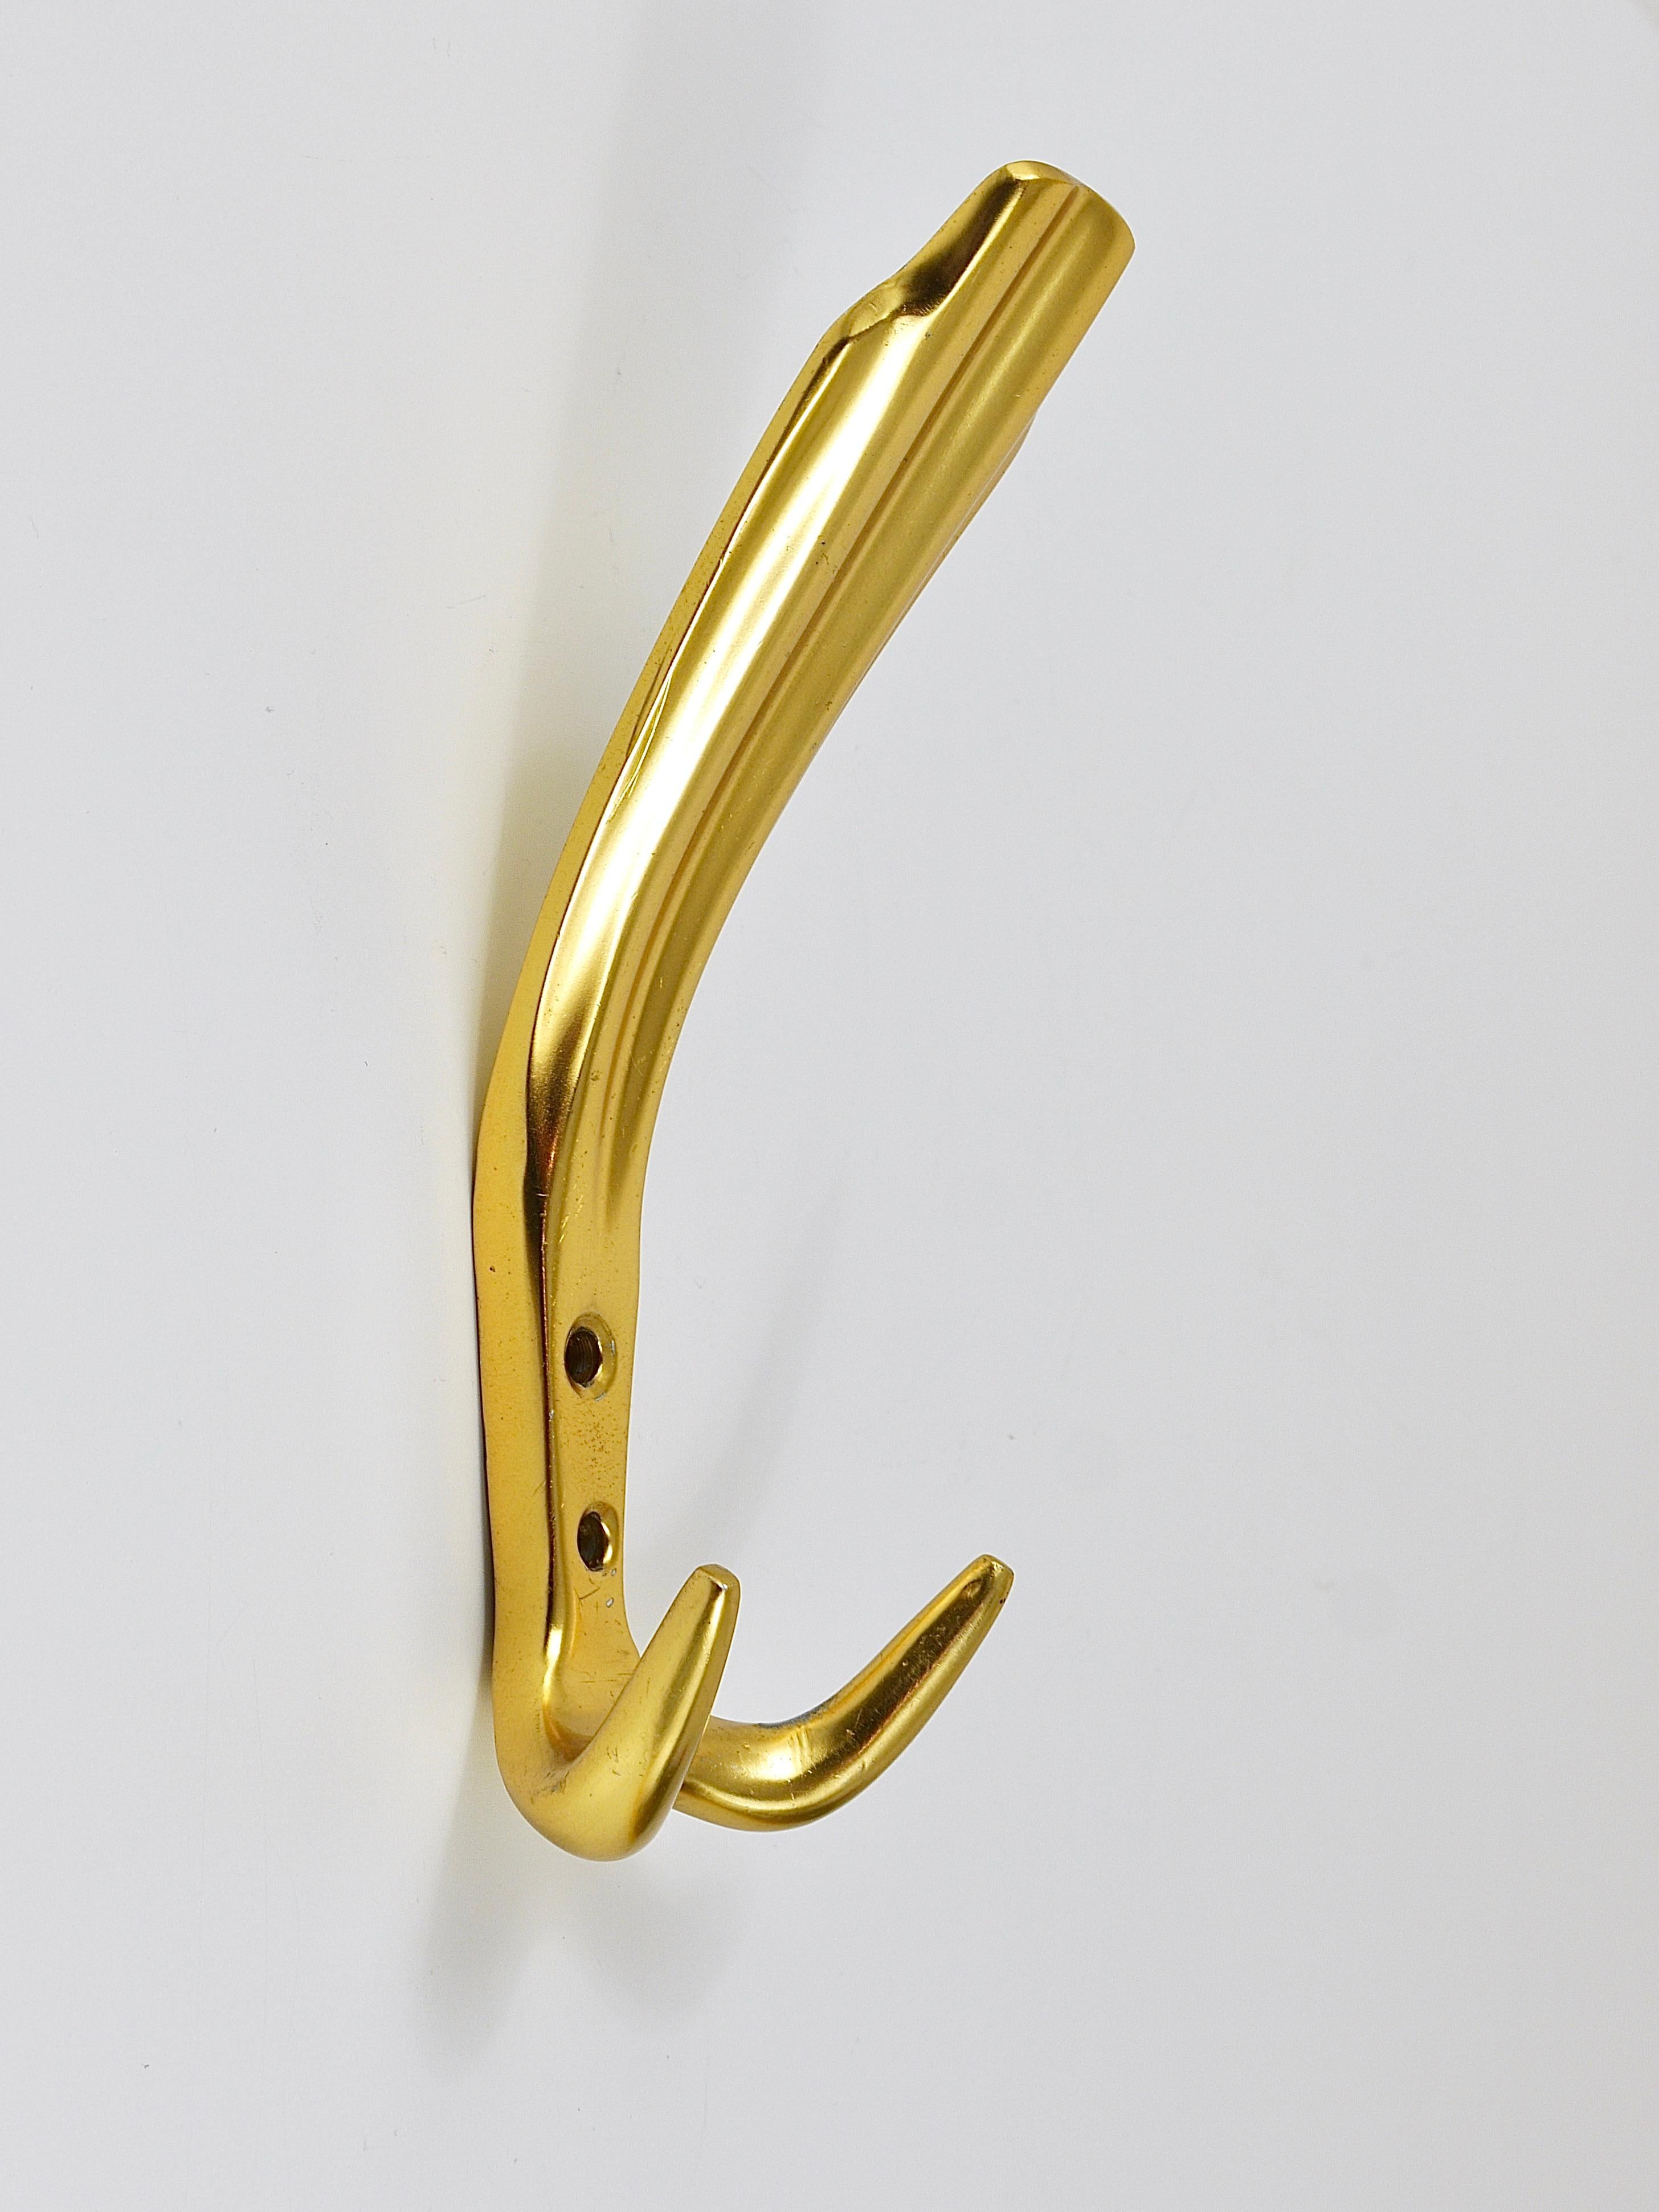 Aluminum Up to Five Golden Hollywood Regency Wall Coat Hooks, Italy, 1970s For Sale